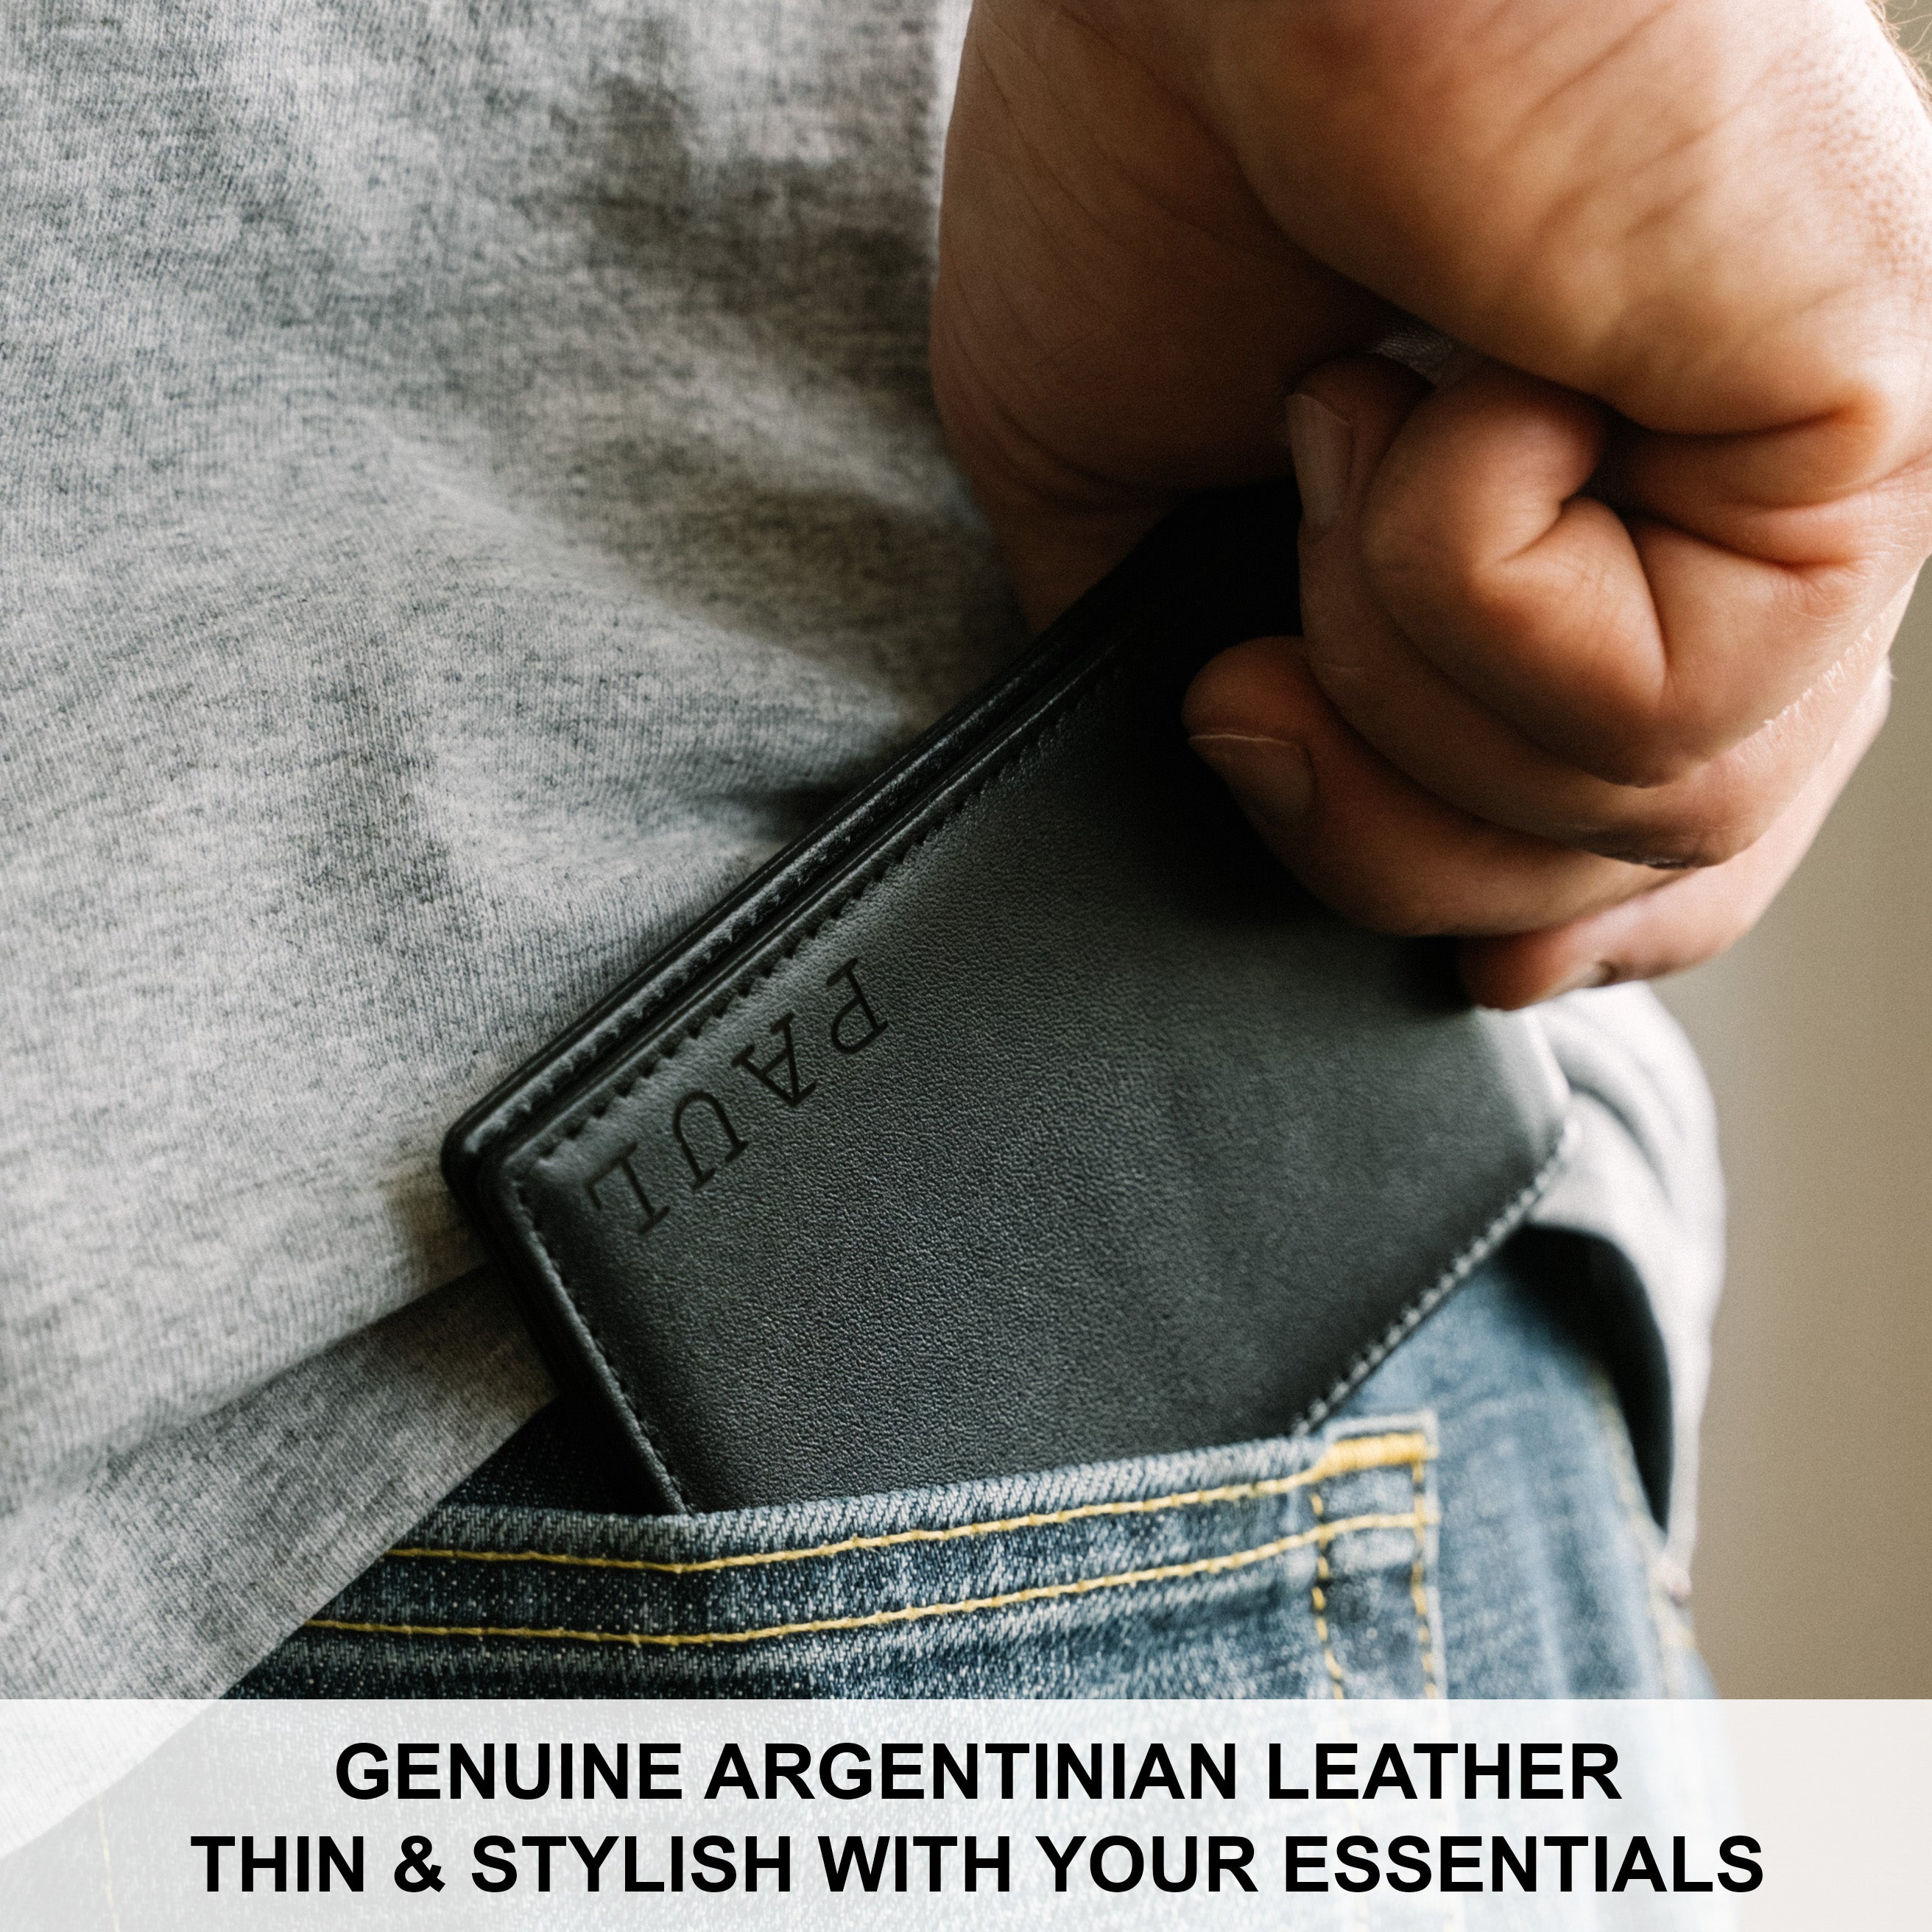 Men's Personalized Leather Wallets: Check Out Our Collection – stayfineco